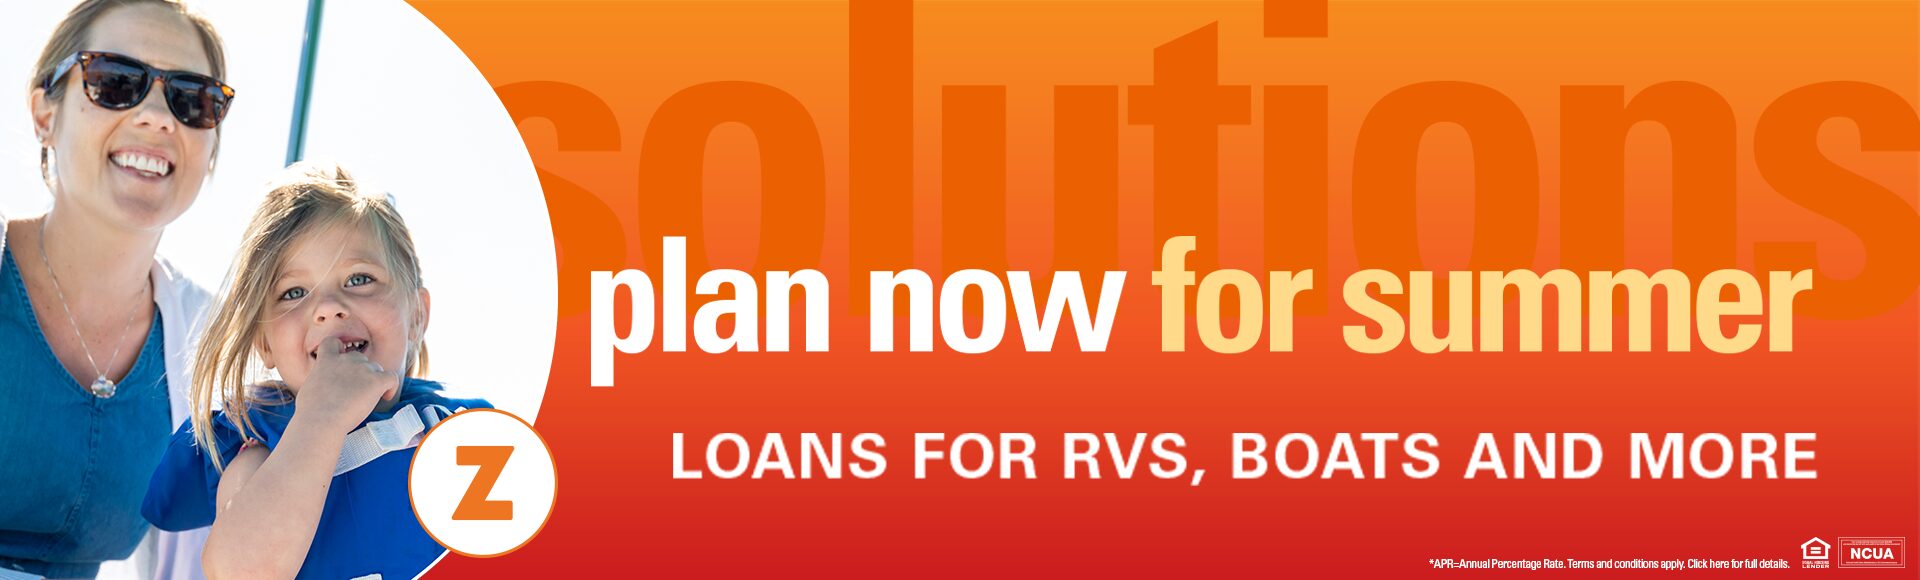 Plan now for summer: Loans for RVs, Boats, and more